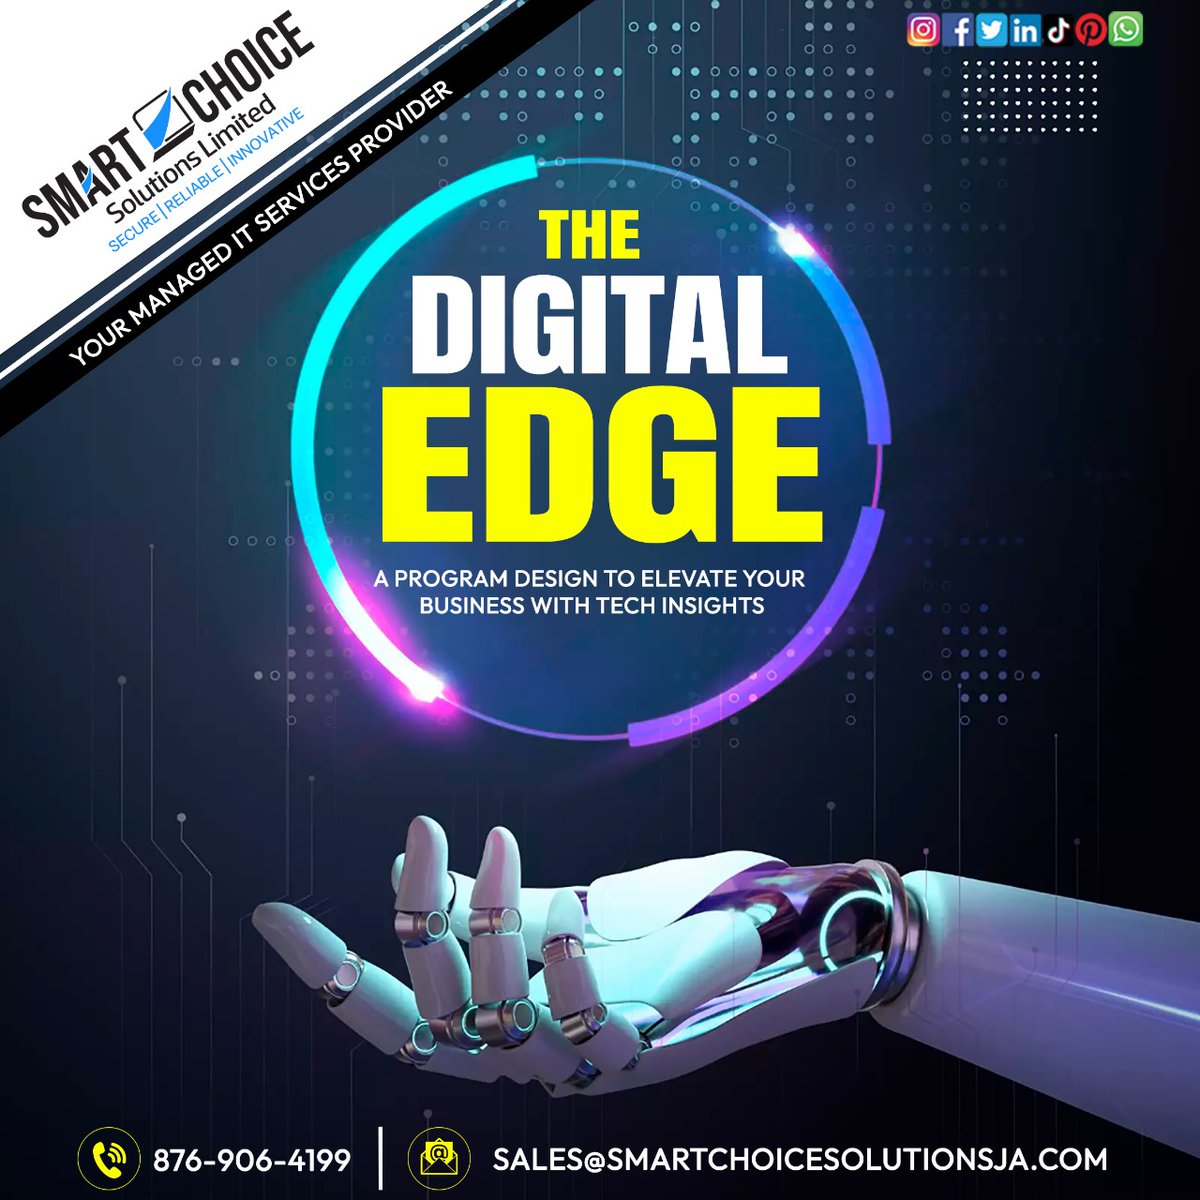 I am thrilled to present - THE DIGITAL EDGE - a dynamic program meticulously crafted to furnish businesses like yours with indispensable technological insights daily.

#TheDigitalEdge #TechnologyInsights #BusinessEmpowerment #Innovation #DigitalTransformation  #CompetitiveEdge